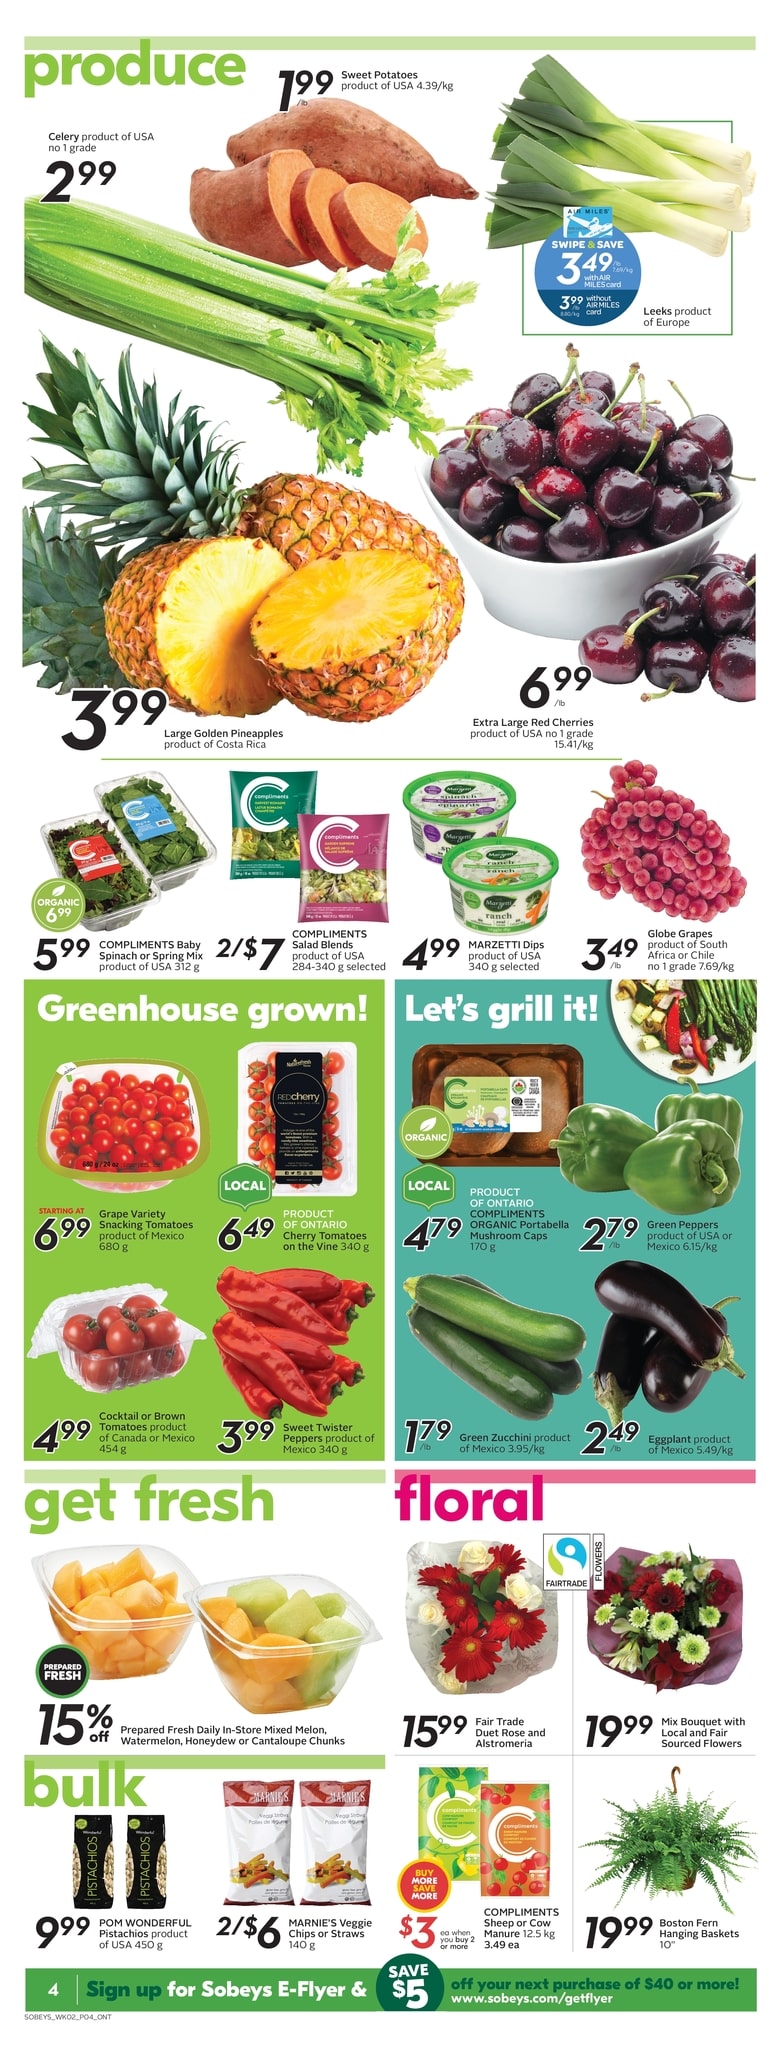 Sobeys - Weekly Flyer Specials - Page 6